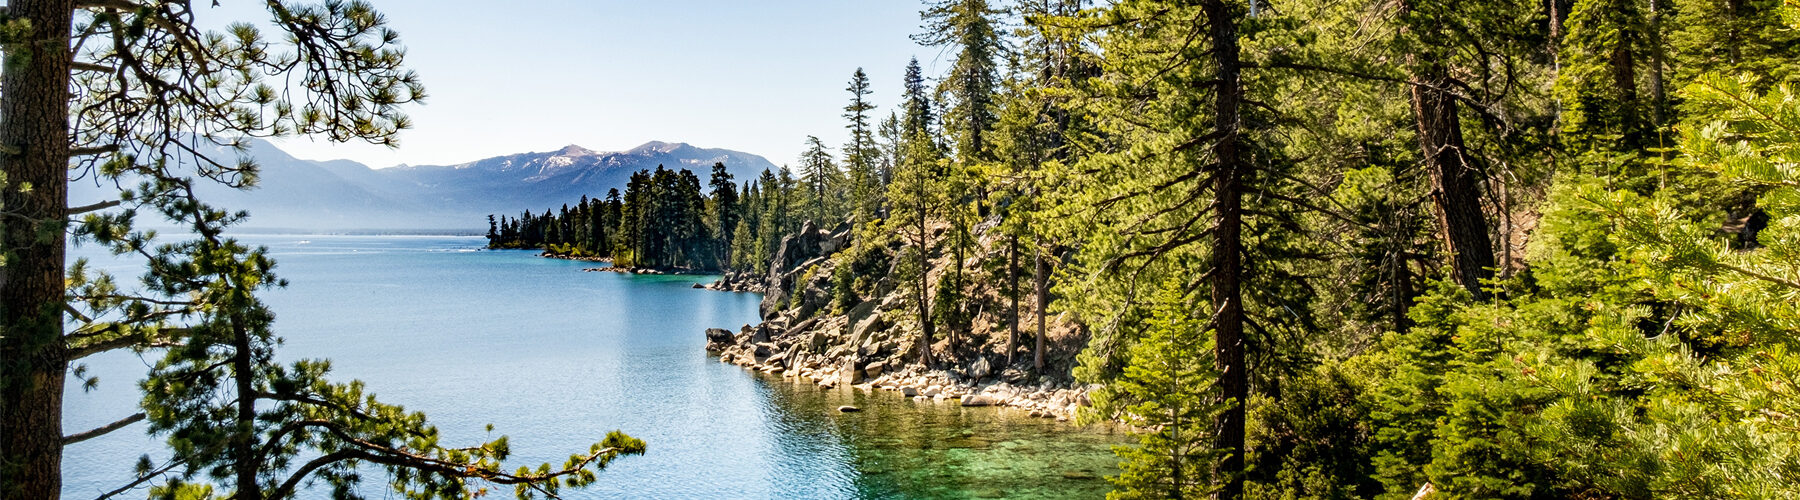 lake tahoe with the woods in the foregroud and mountains in the background